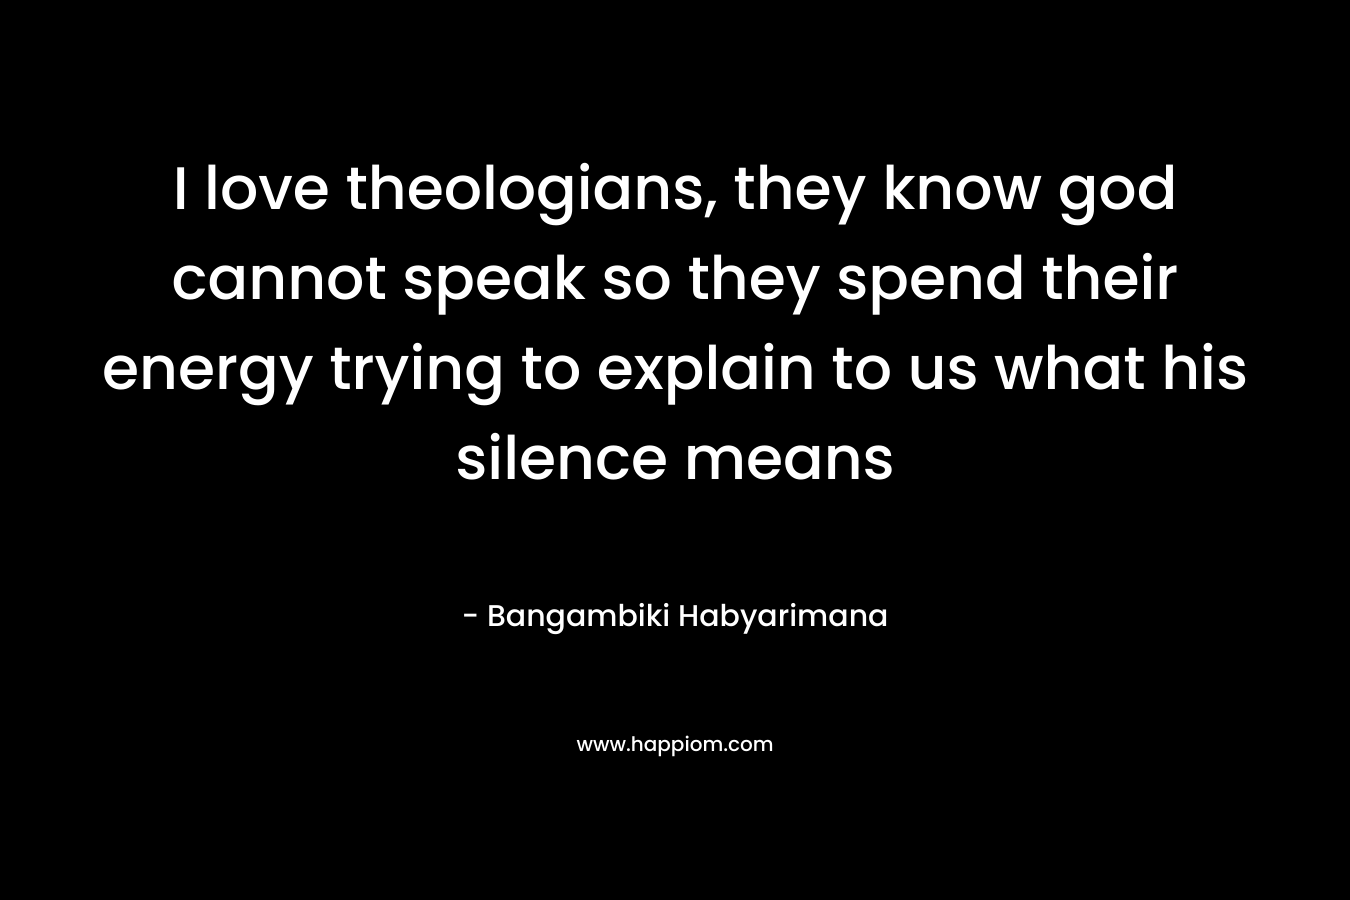 I love theologians, they know god cannot speak so they spend their energy trying to explain to us what his silence means